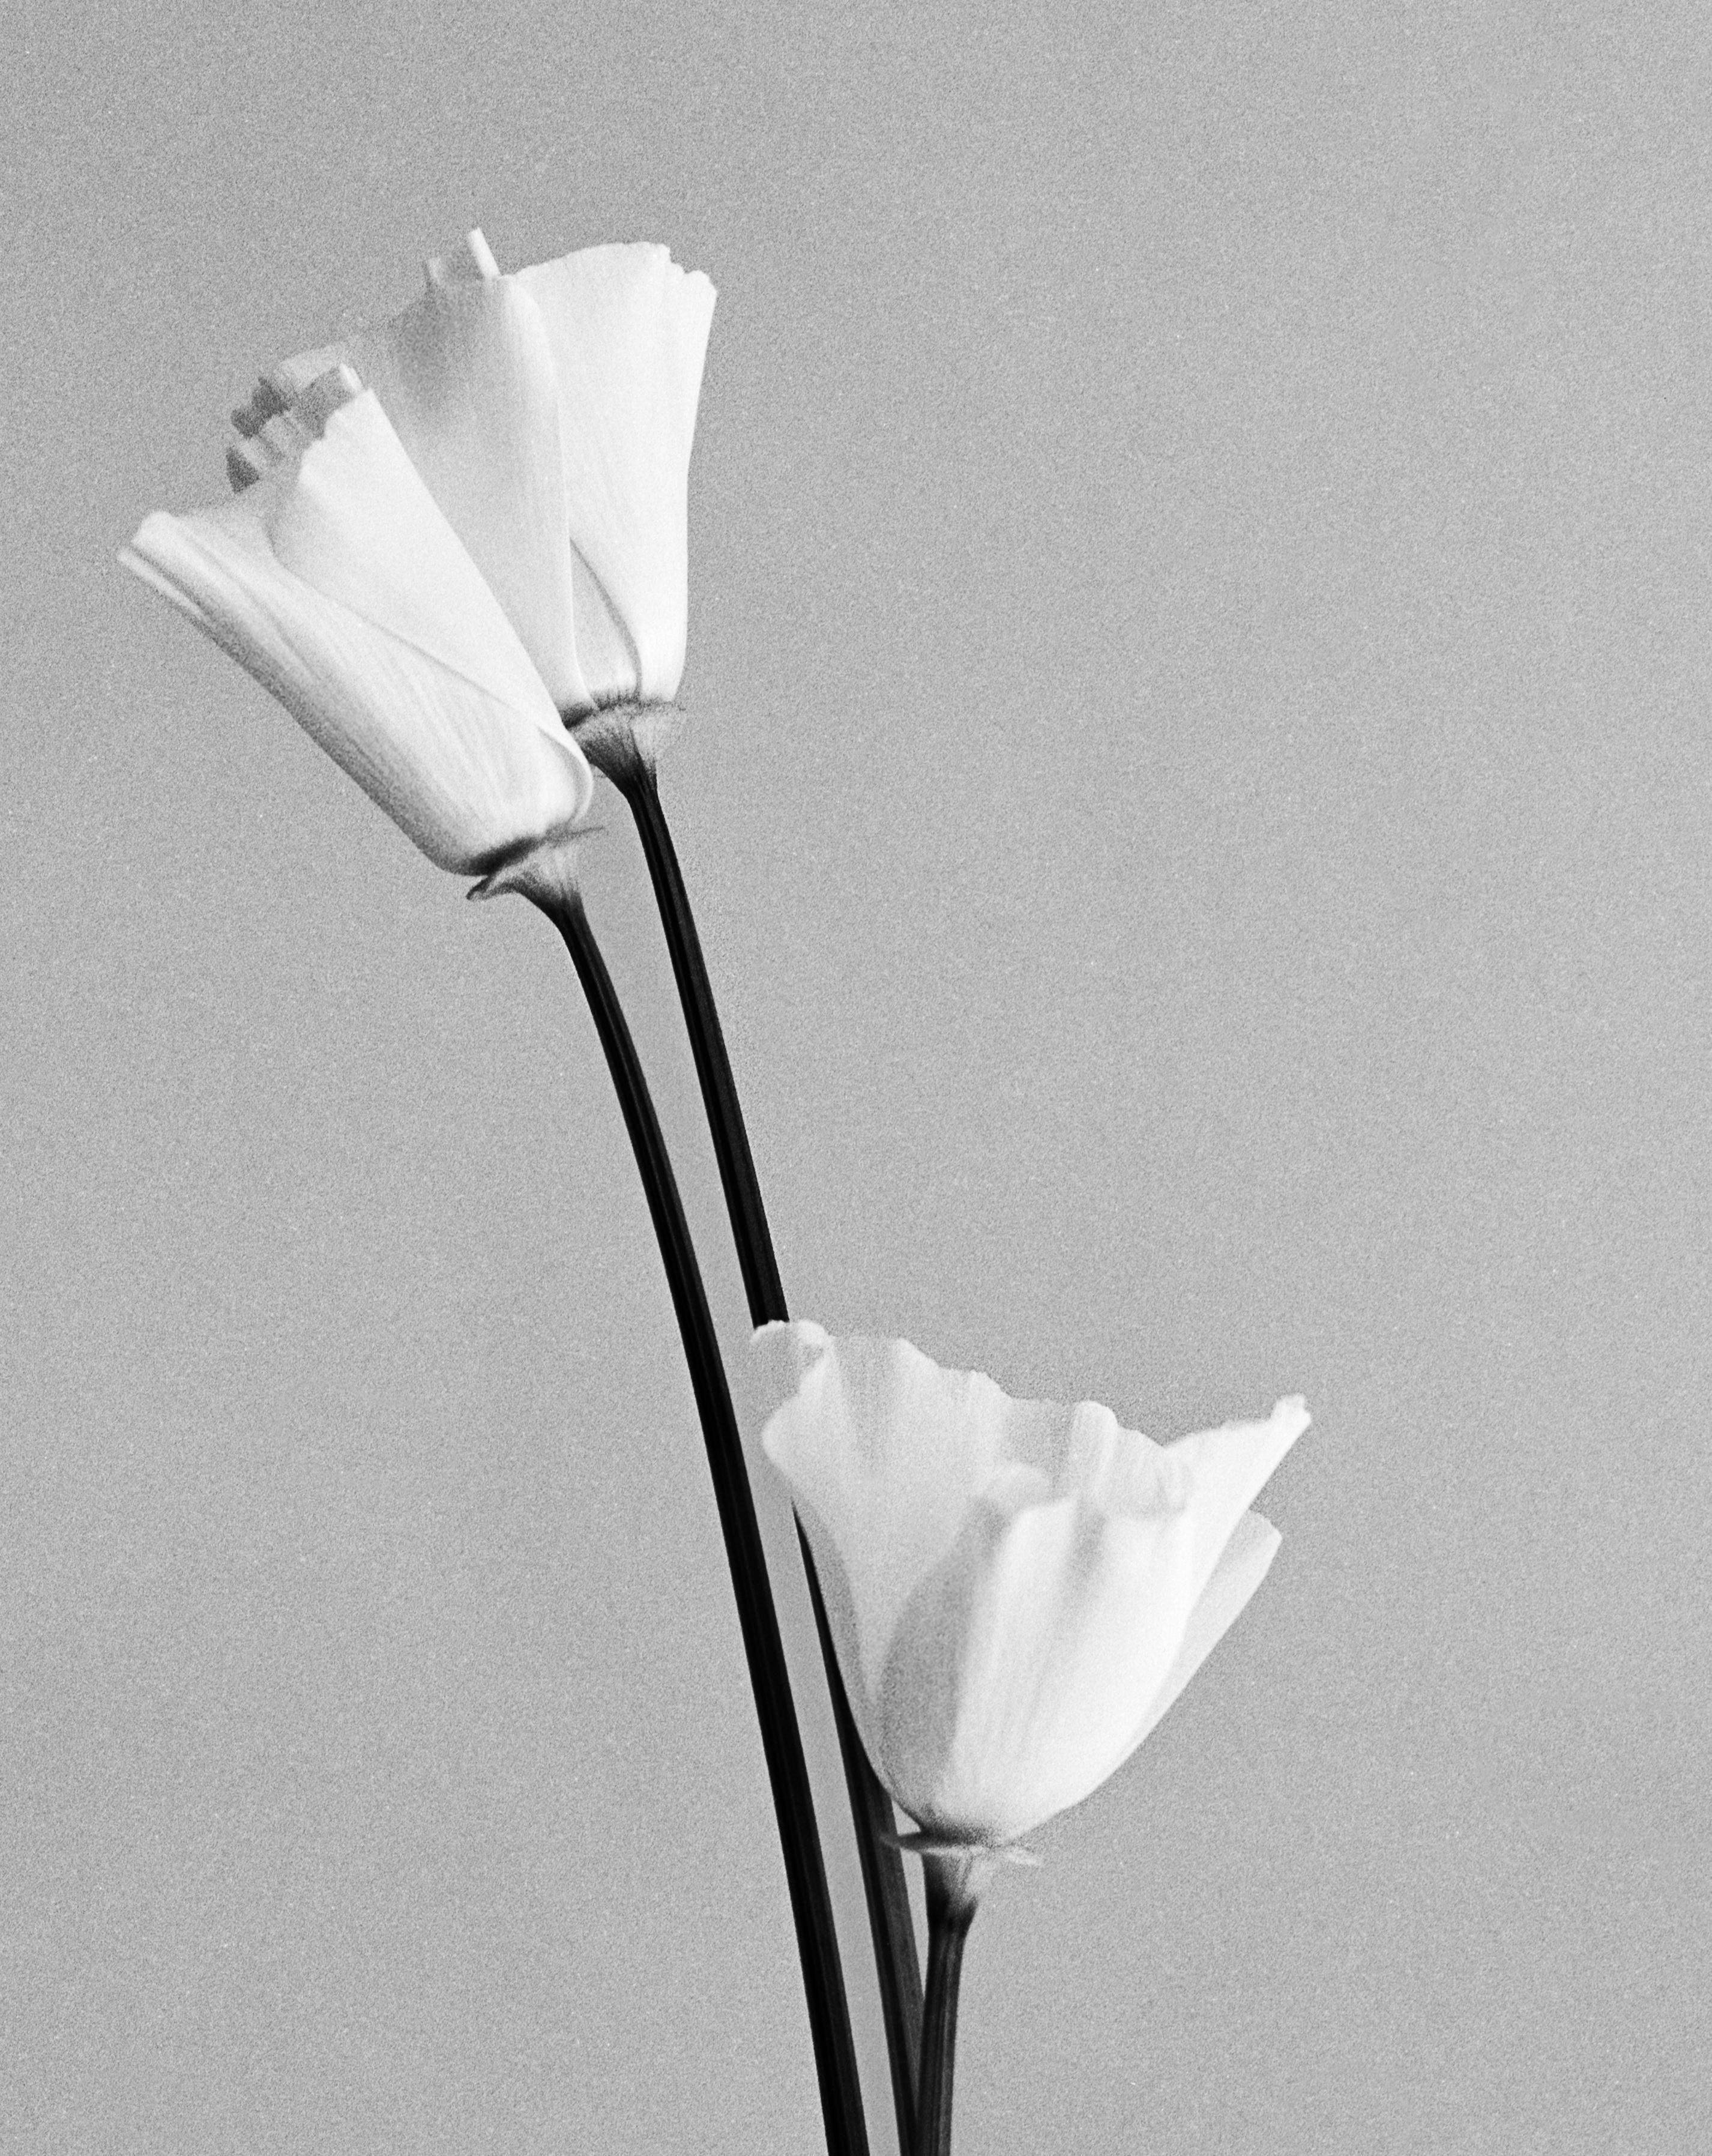 In Parallel - couple black and white poppies in vase, Limited edition of 20 - Contemporary Photograph by Ugne Pouwell